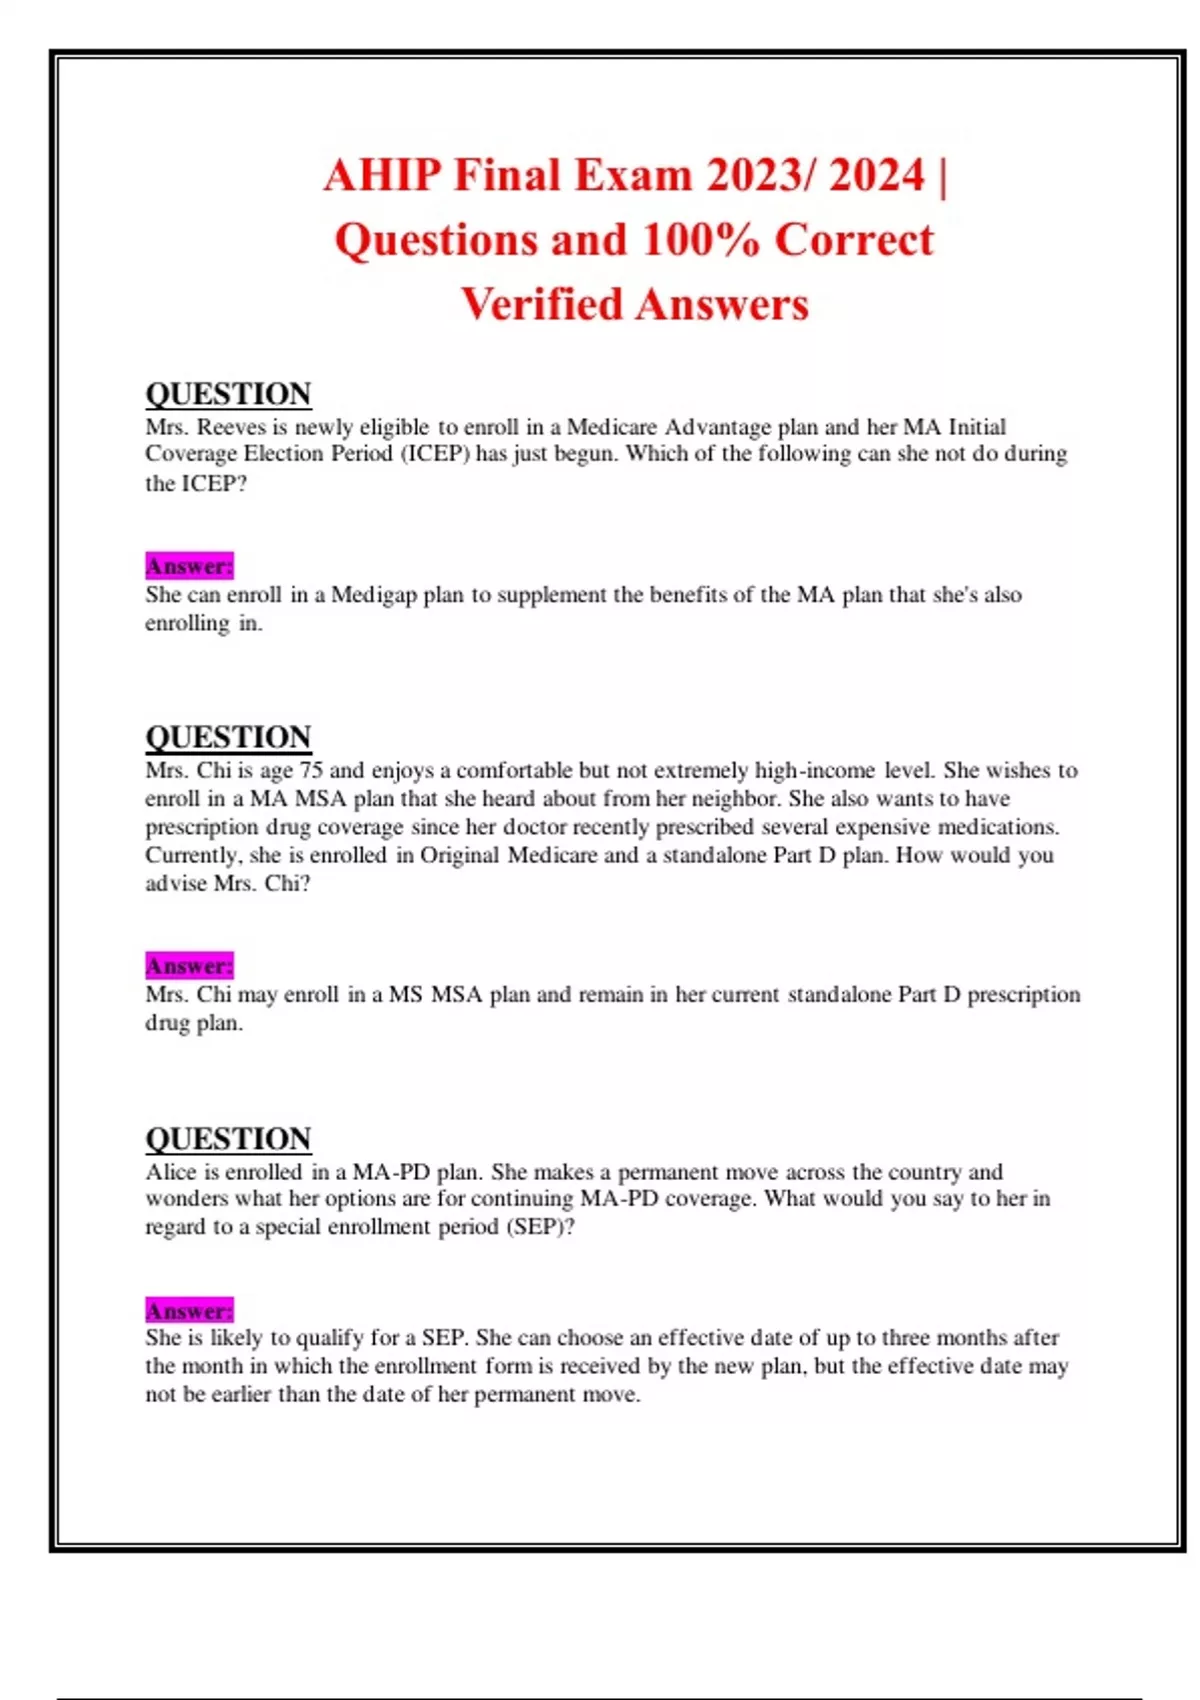 AHIP Final Exam 2023/ 2024 Questions and 100 Correct Verified